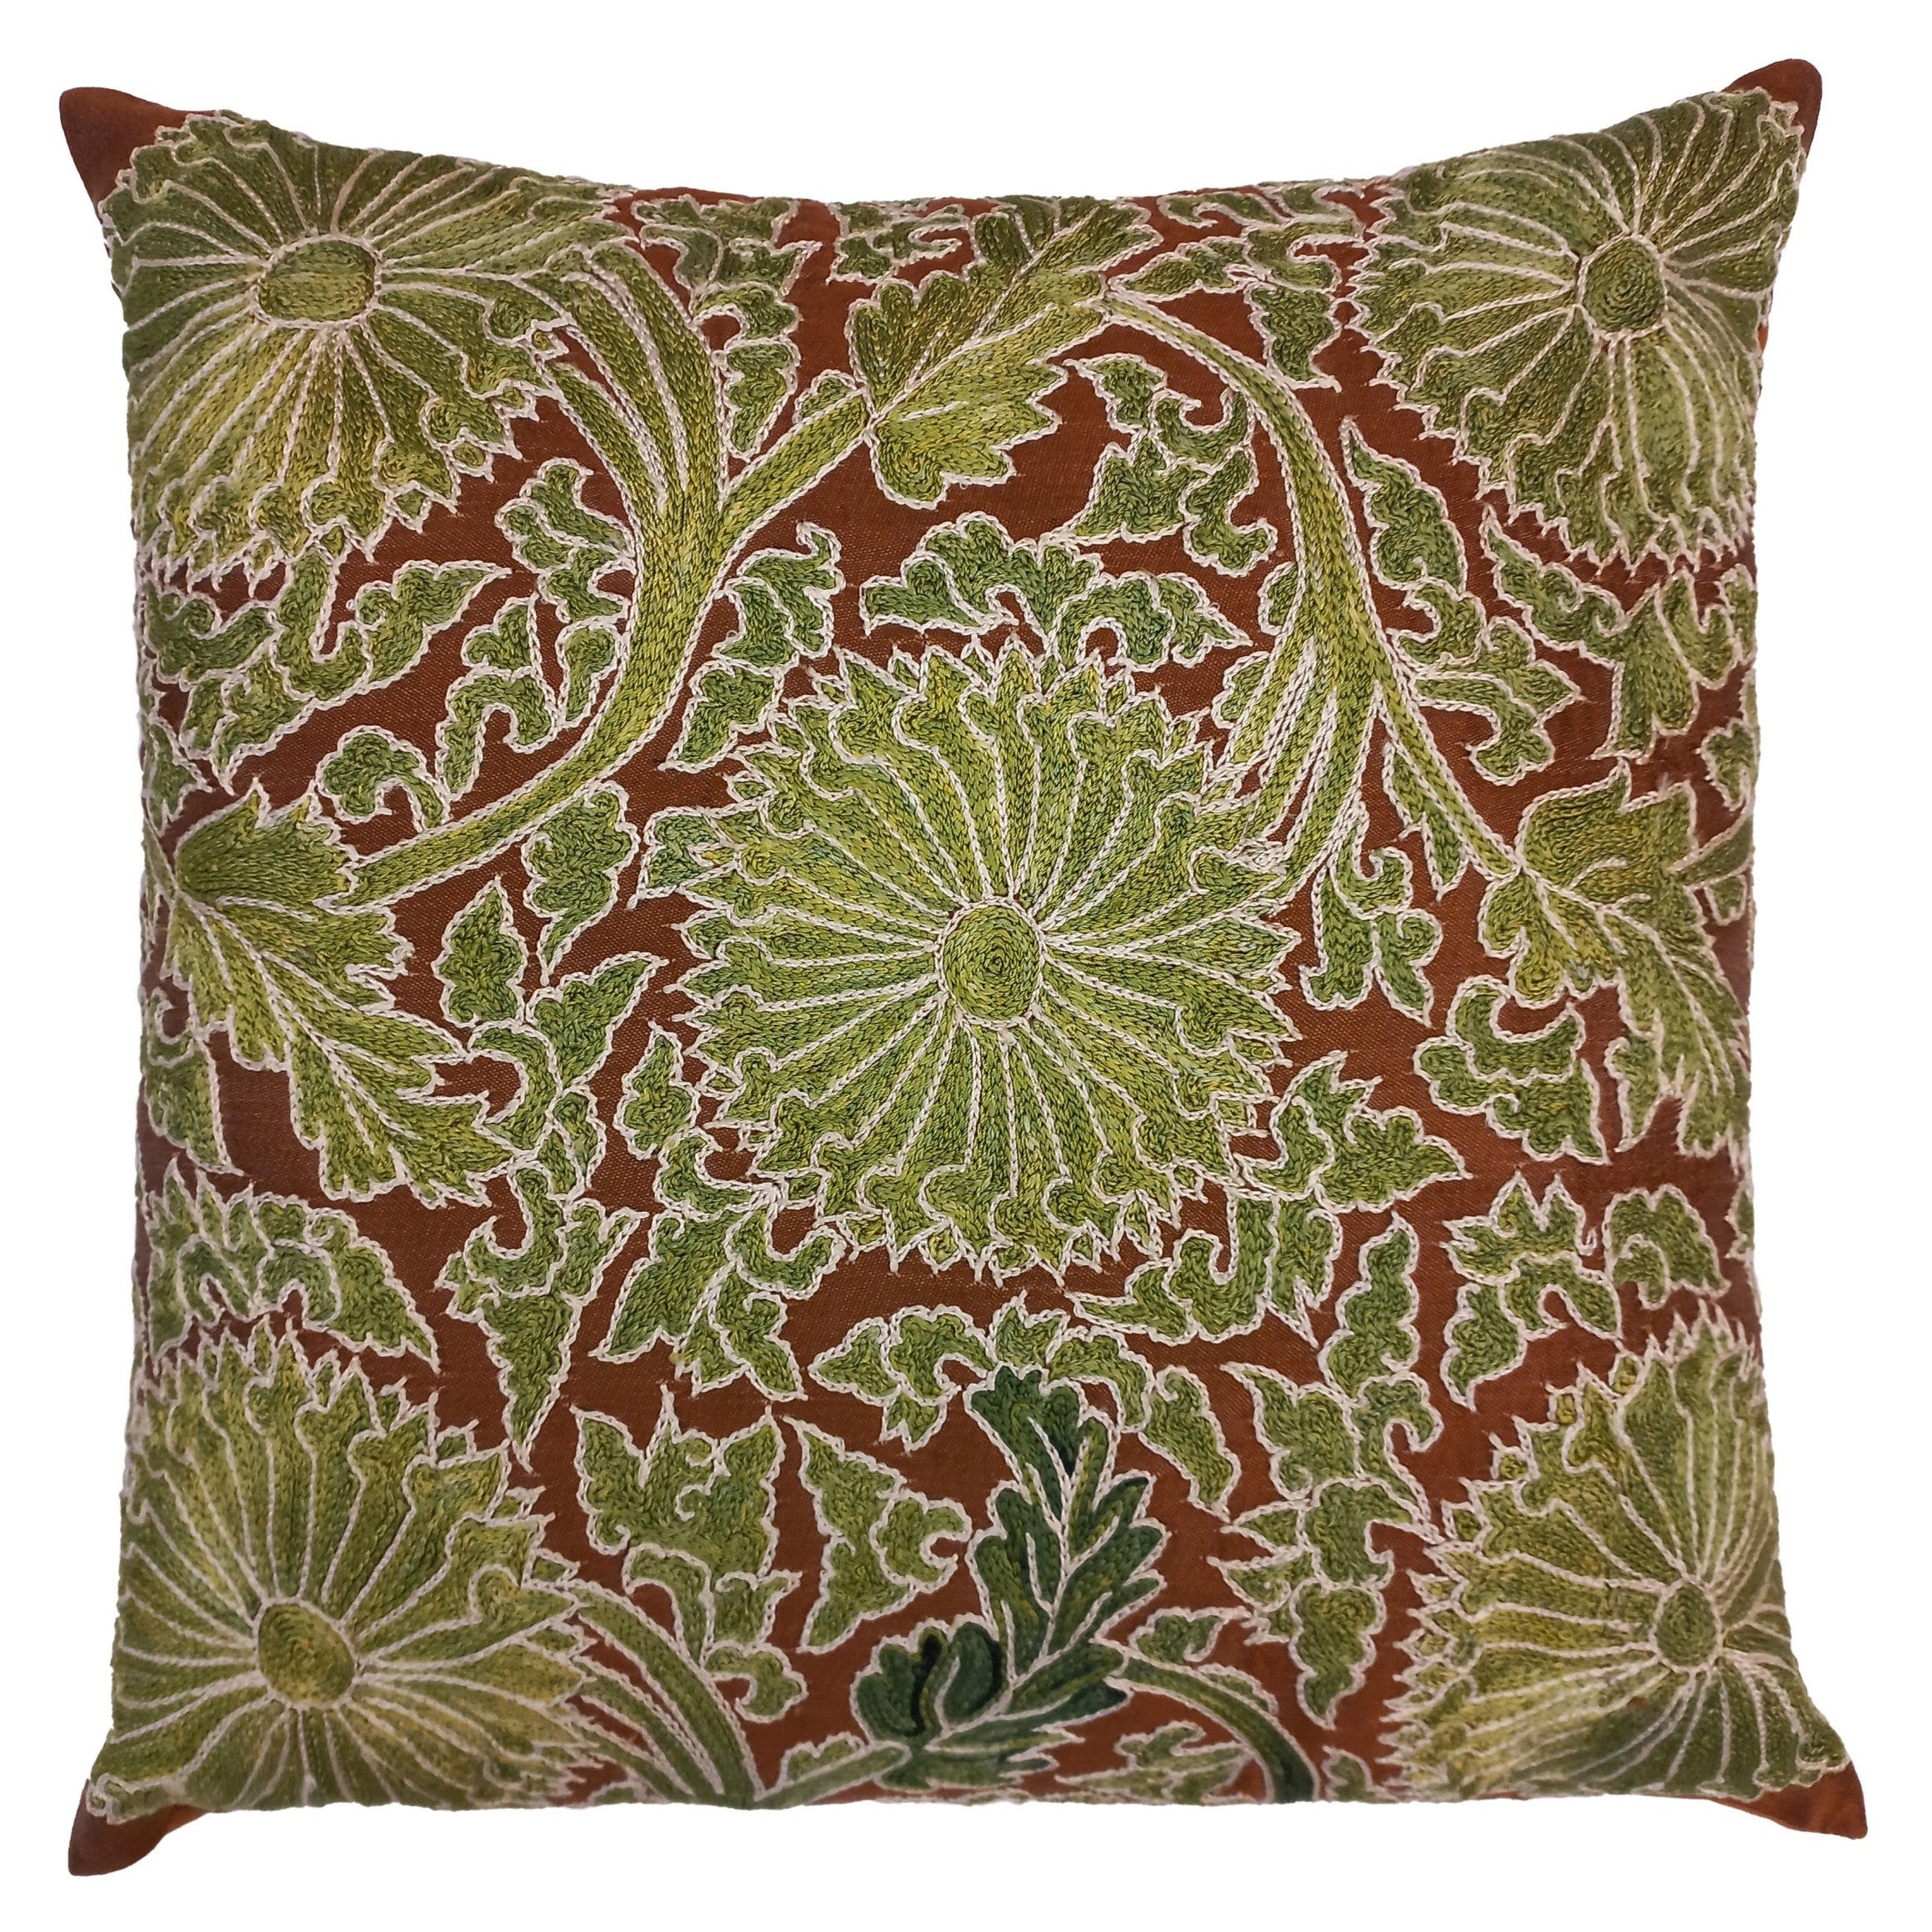 18"x18" Hand Embroidered 100% Silk Handmade Throw Pillow Cover in Brown & Green For Sale